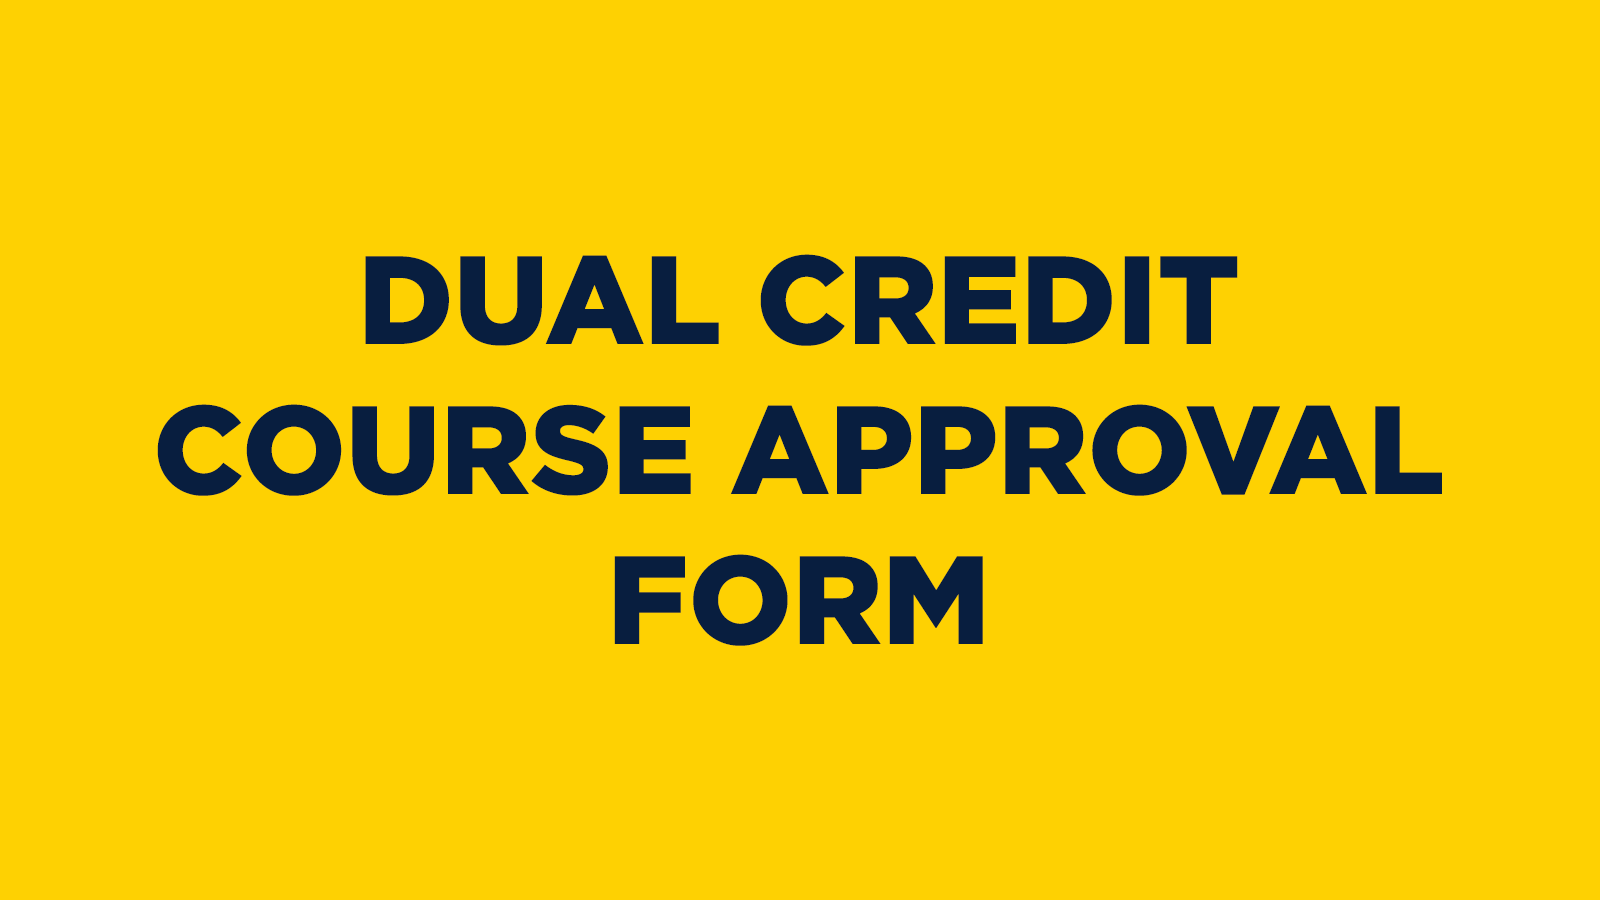 Dual Credit Course Approval Form